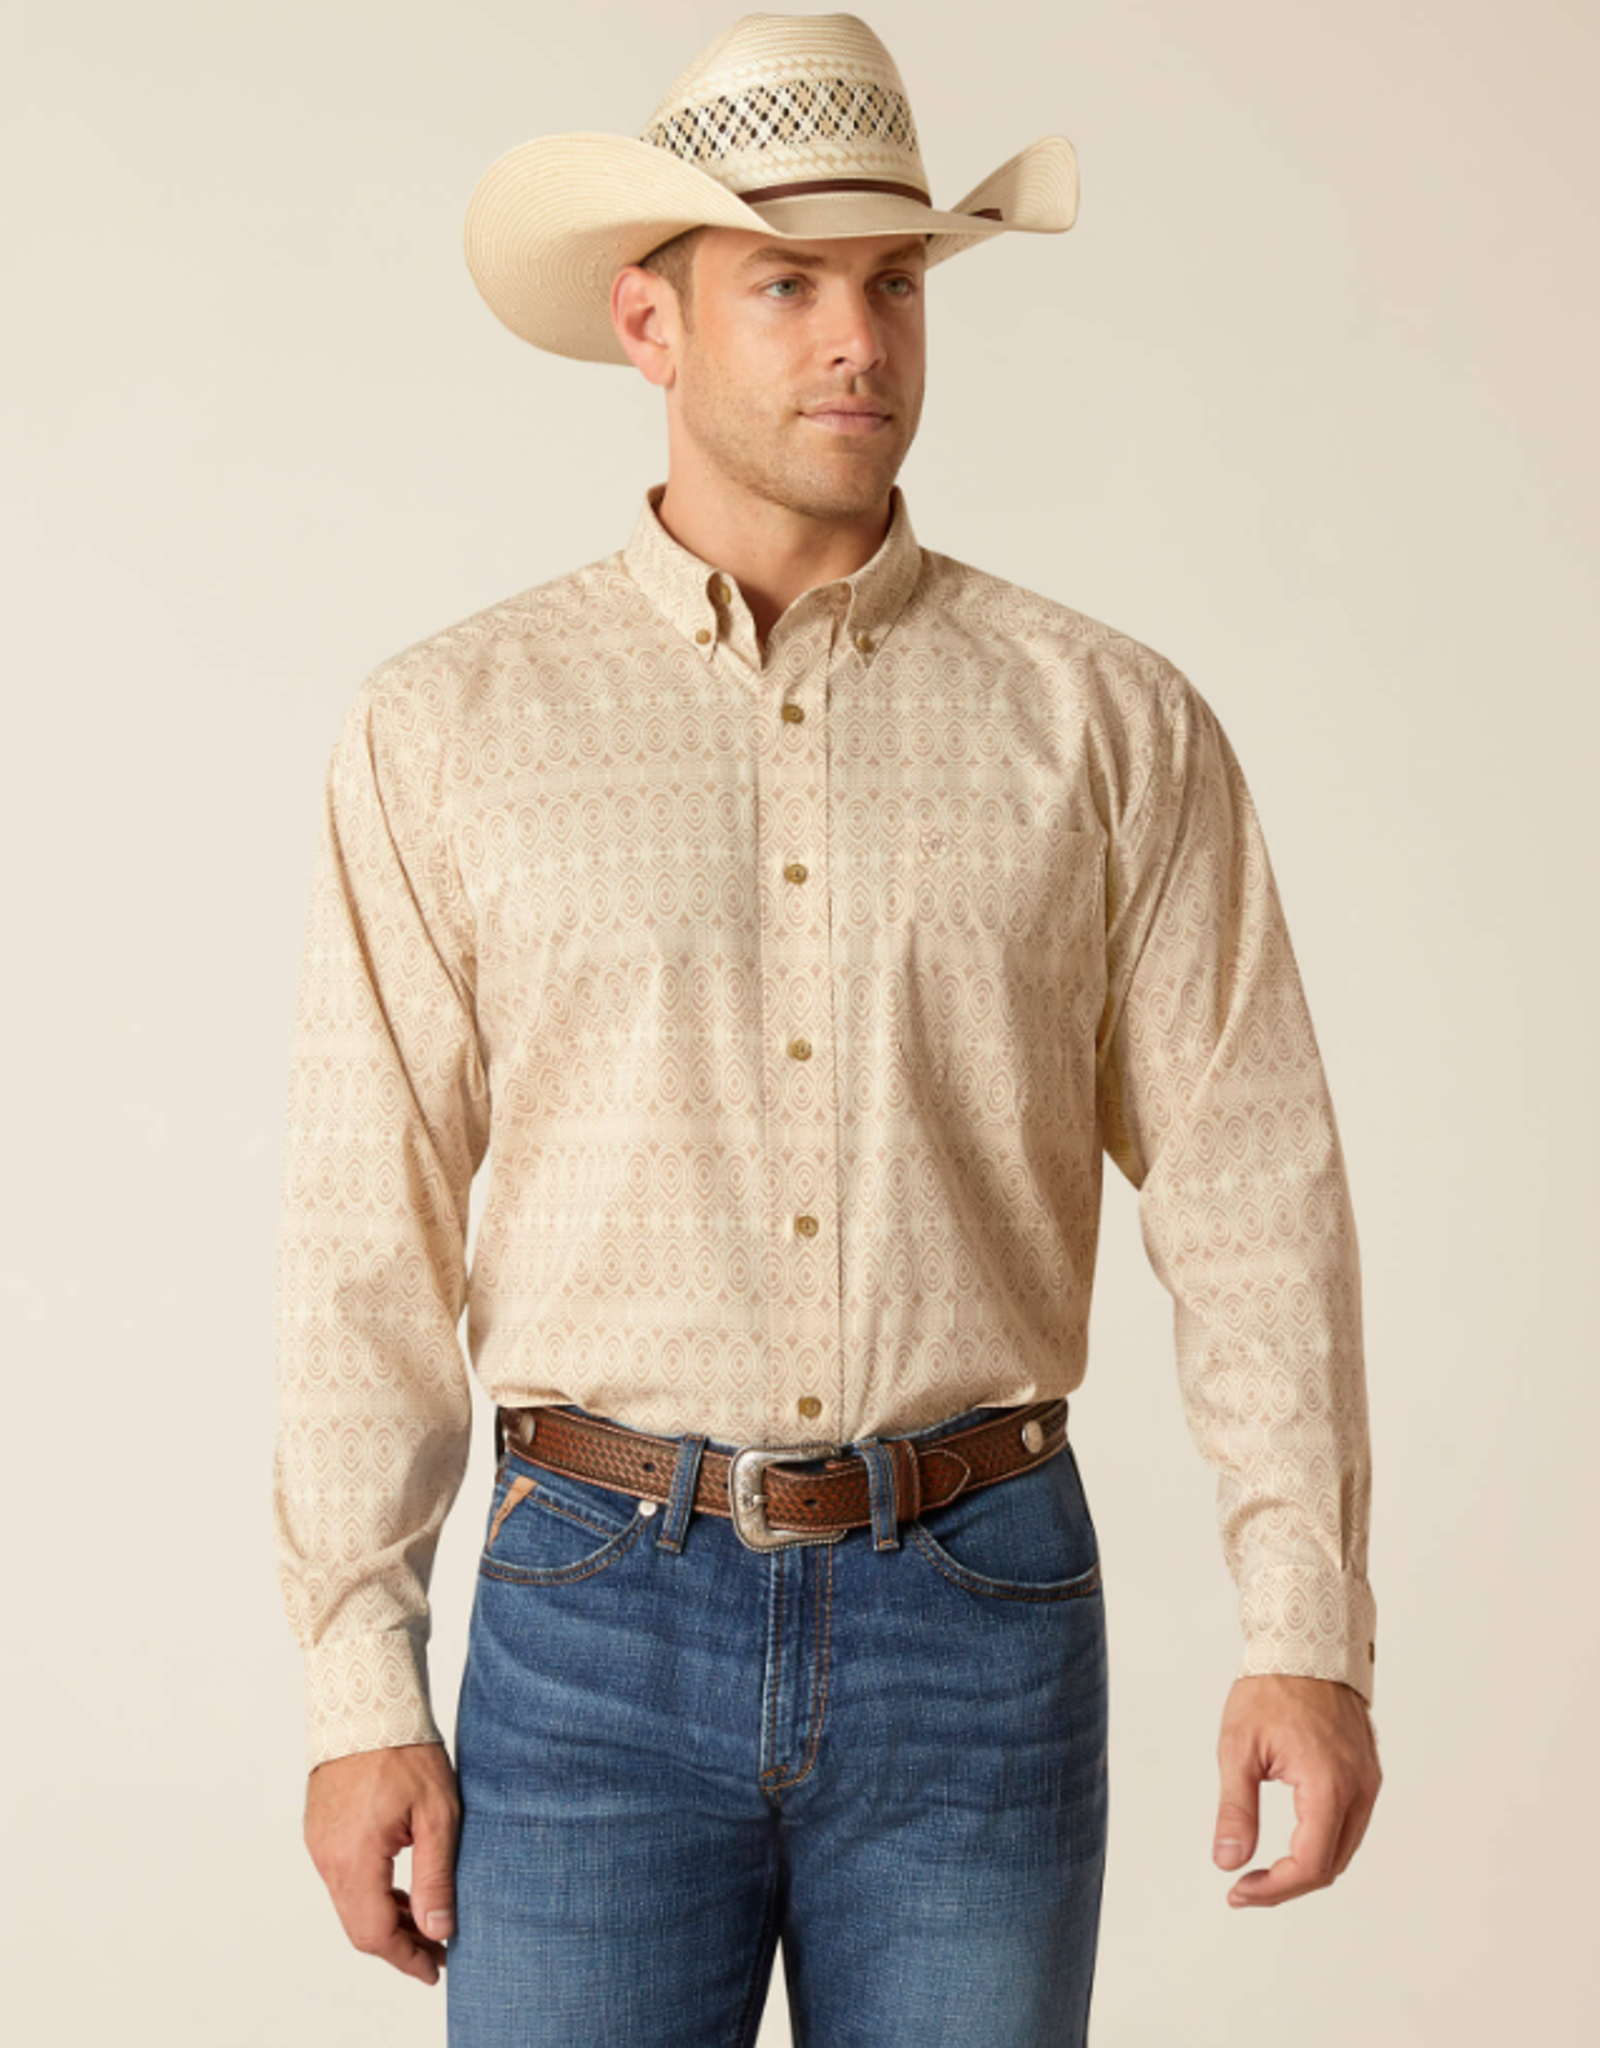 ARIAT SHIRT MNS ARIAT 360 AIRFLOW LS SIMPLY TAUPE